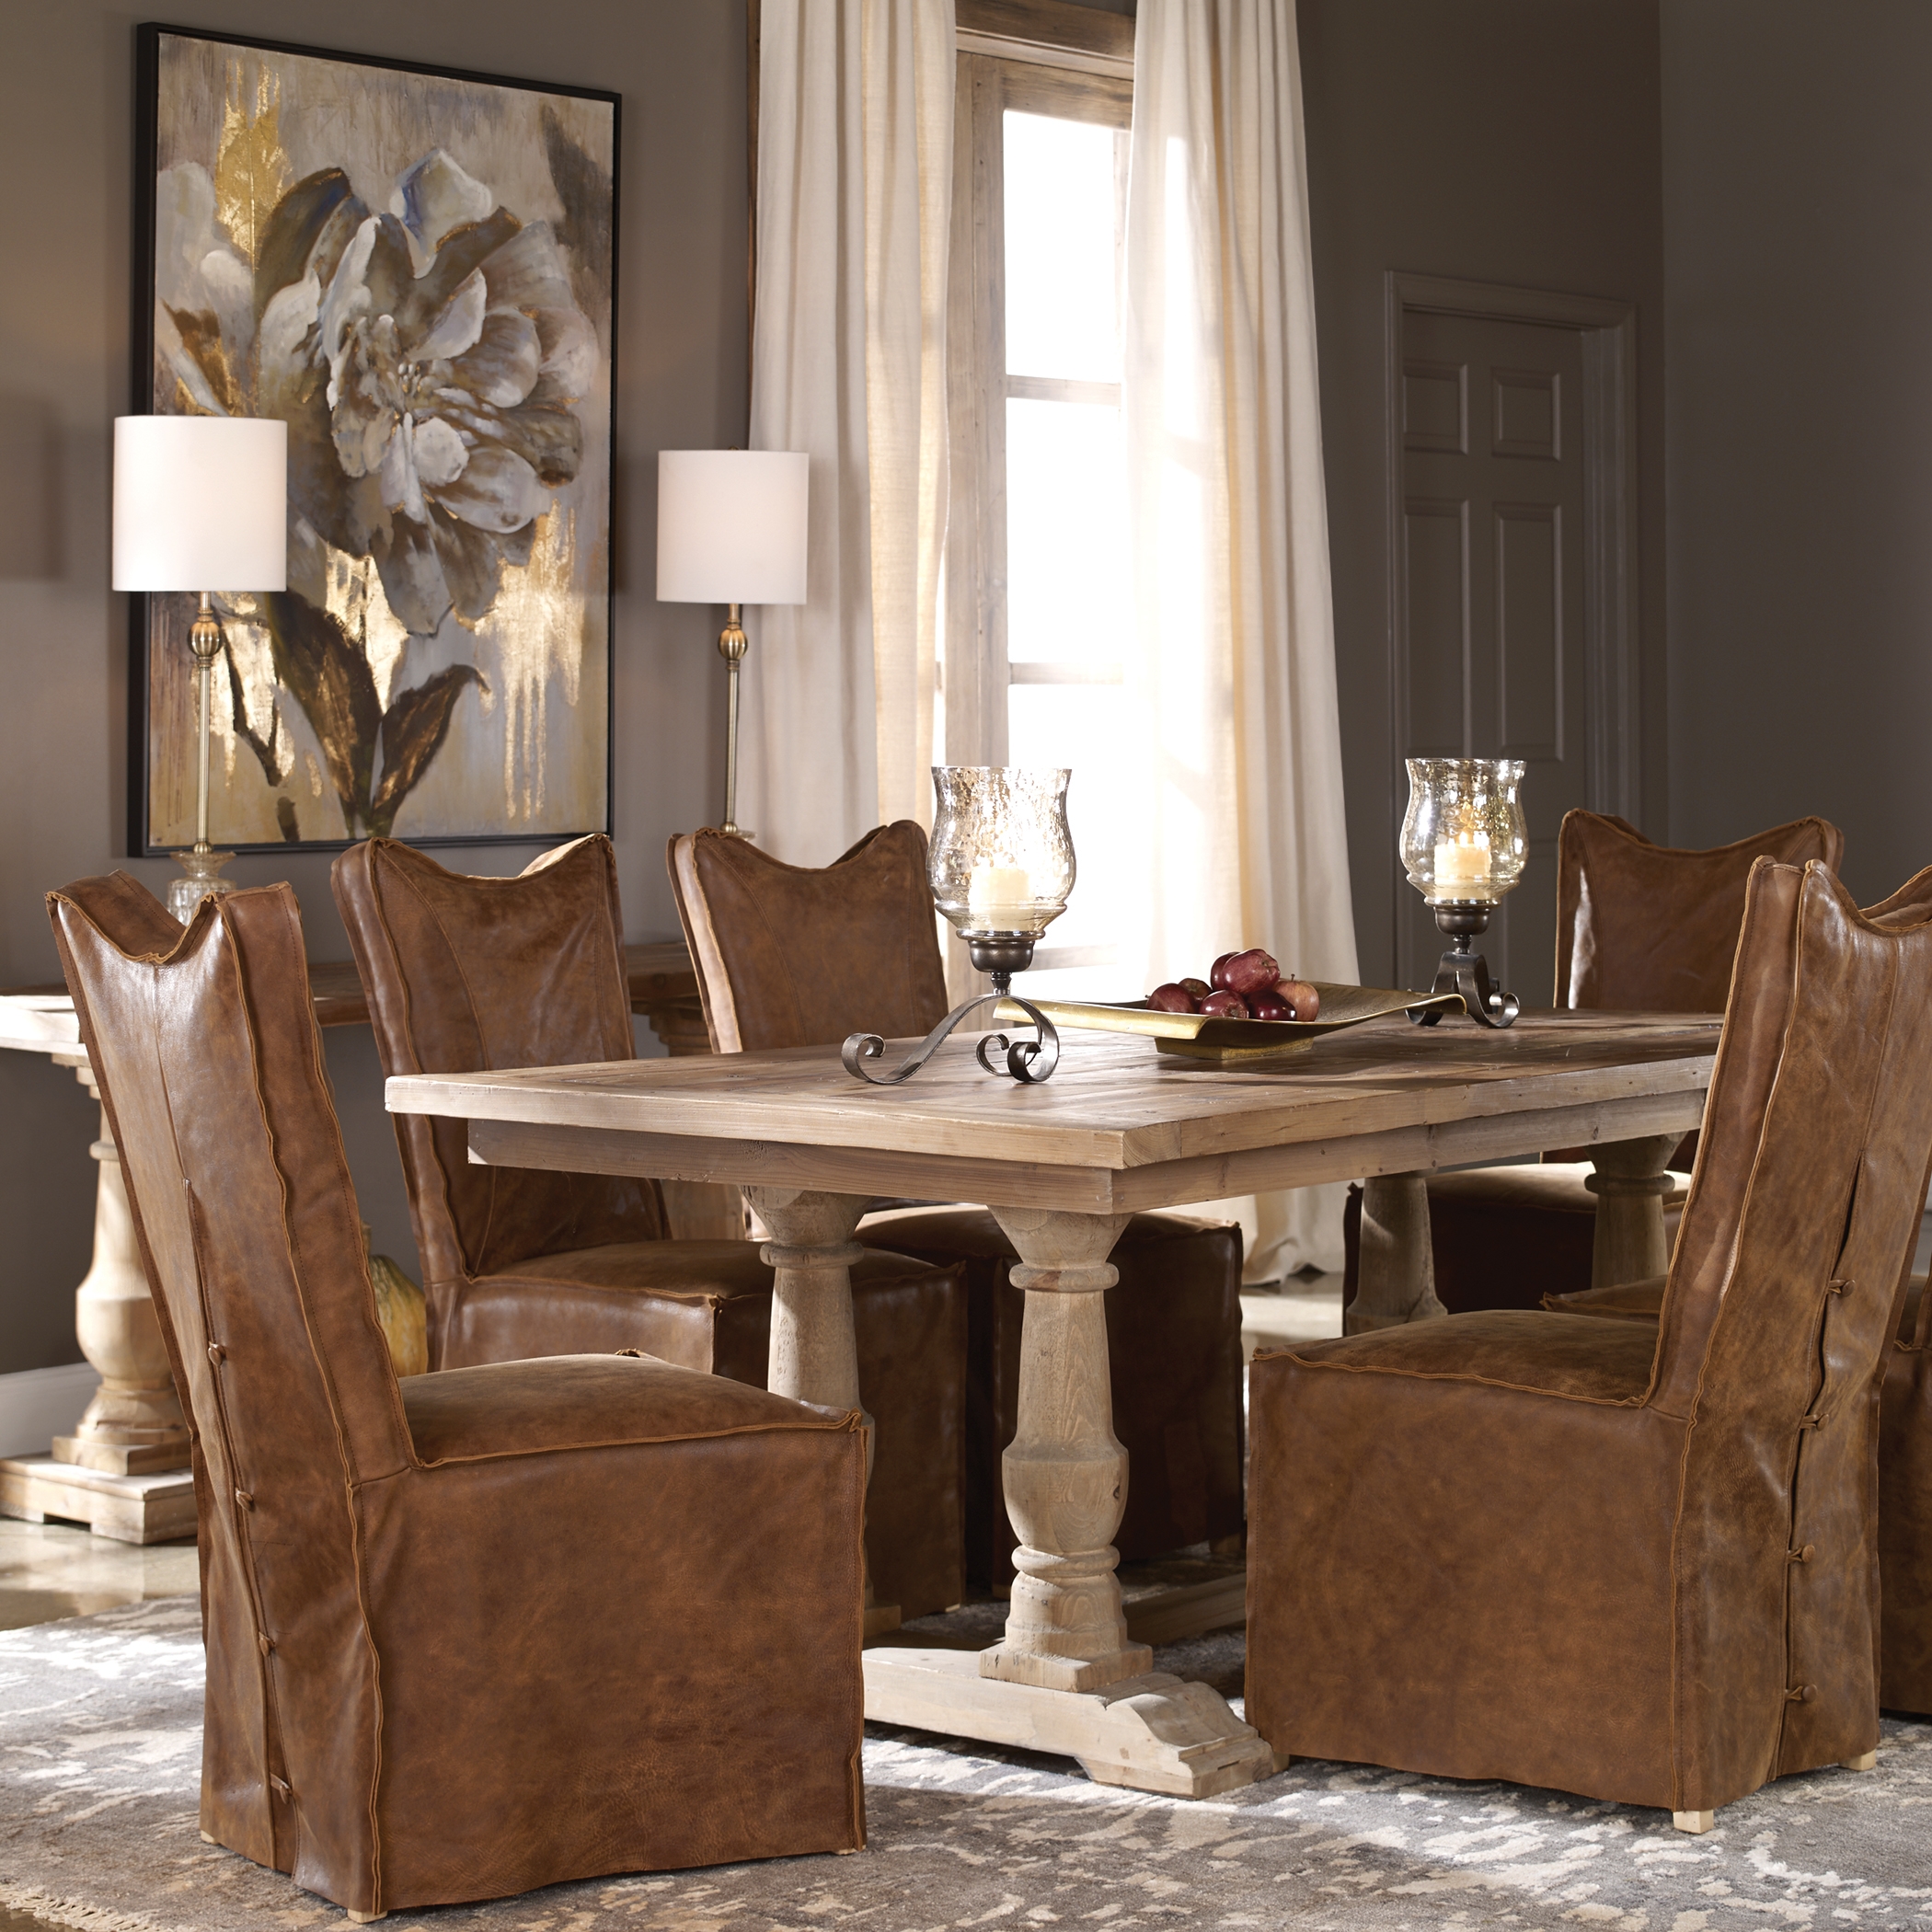 Stratford Wood Dining Table - Image 1